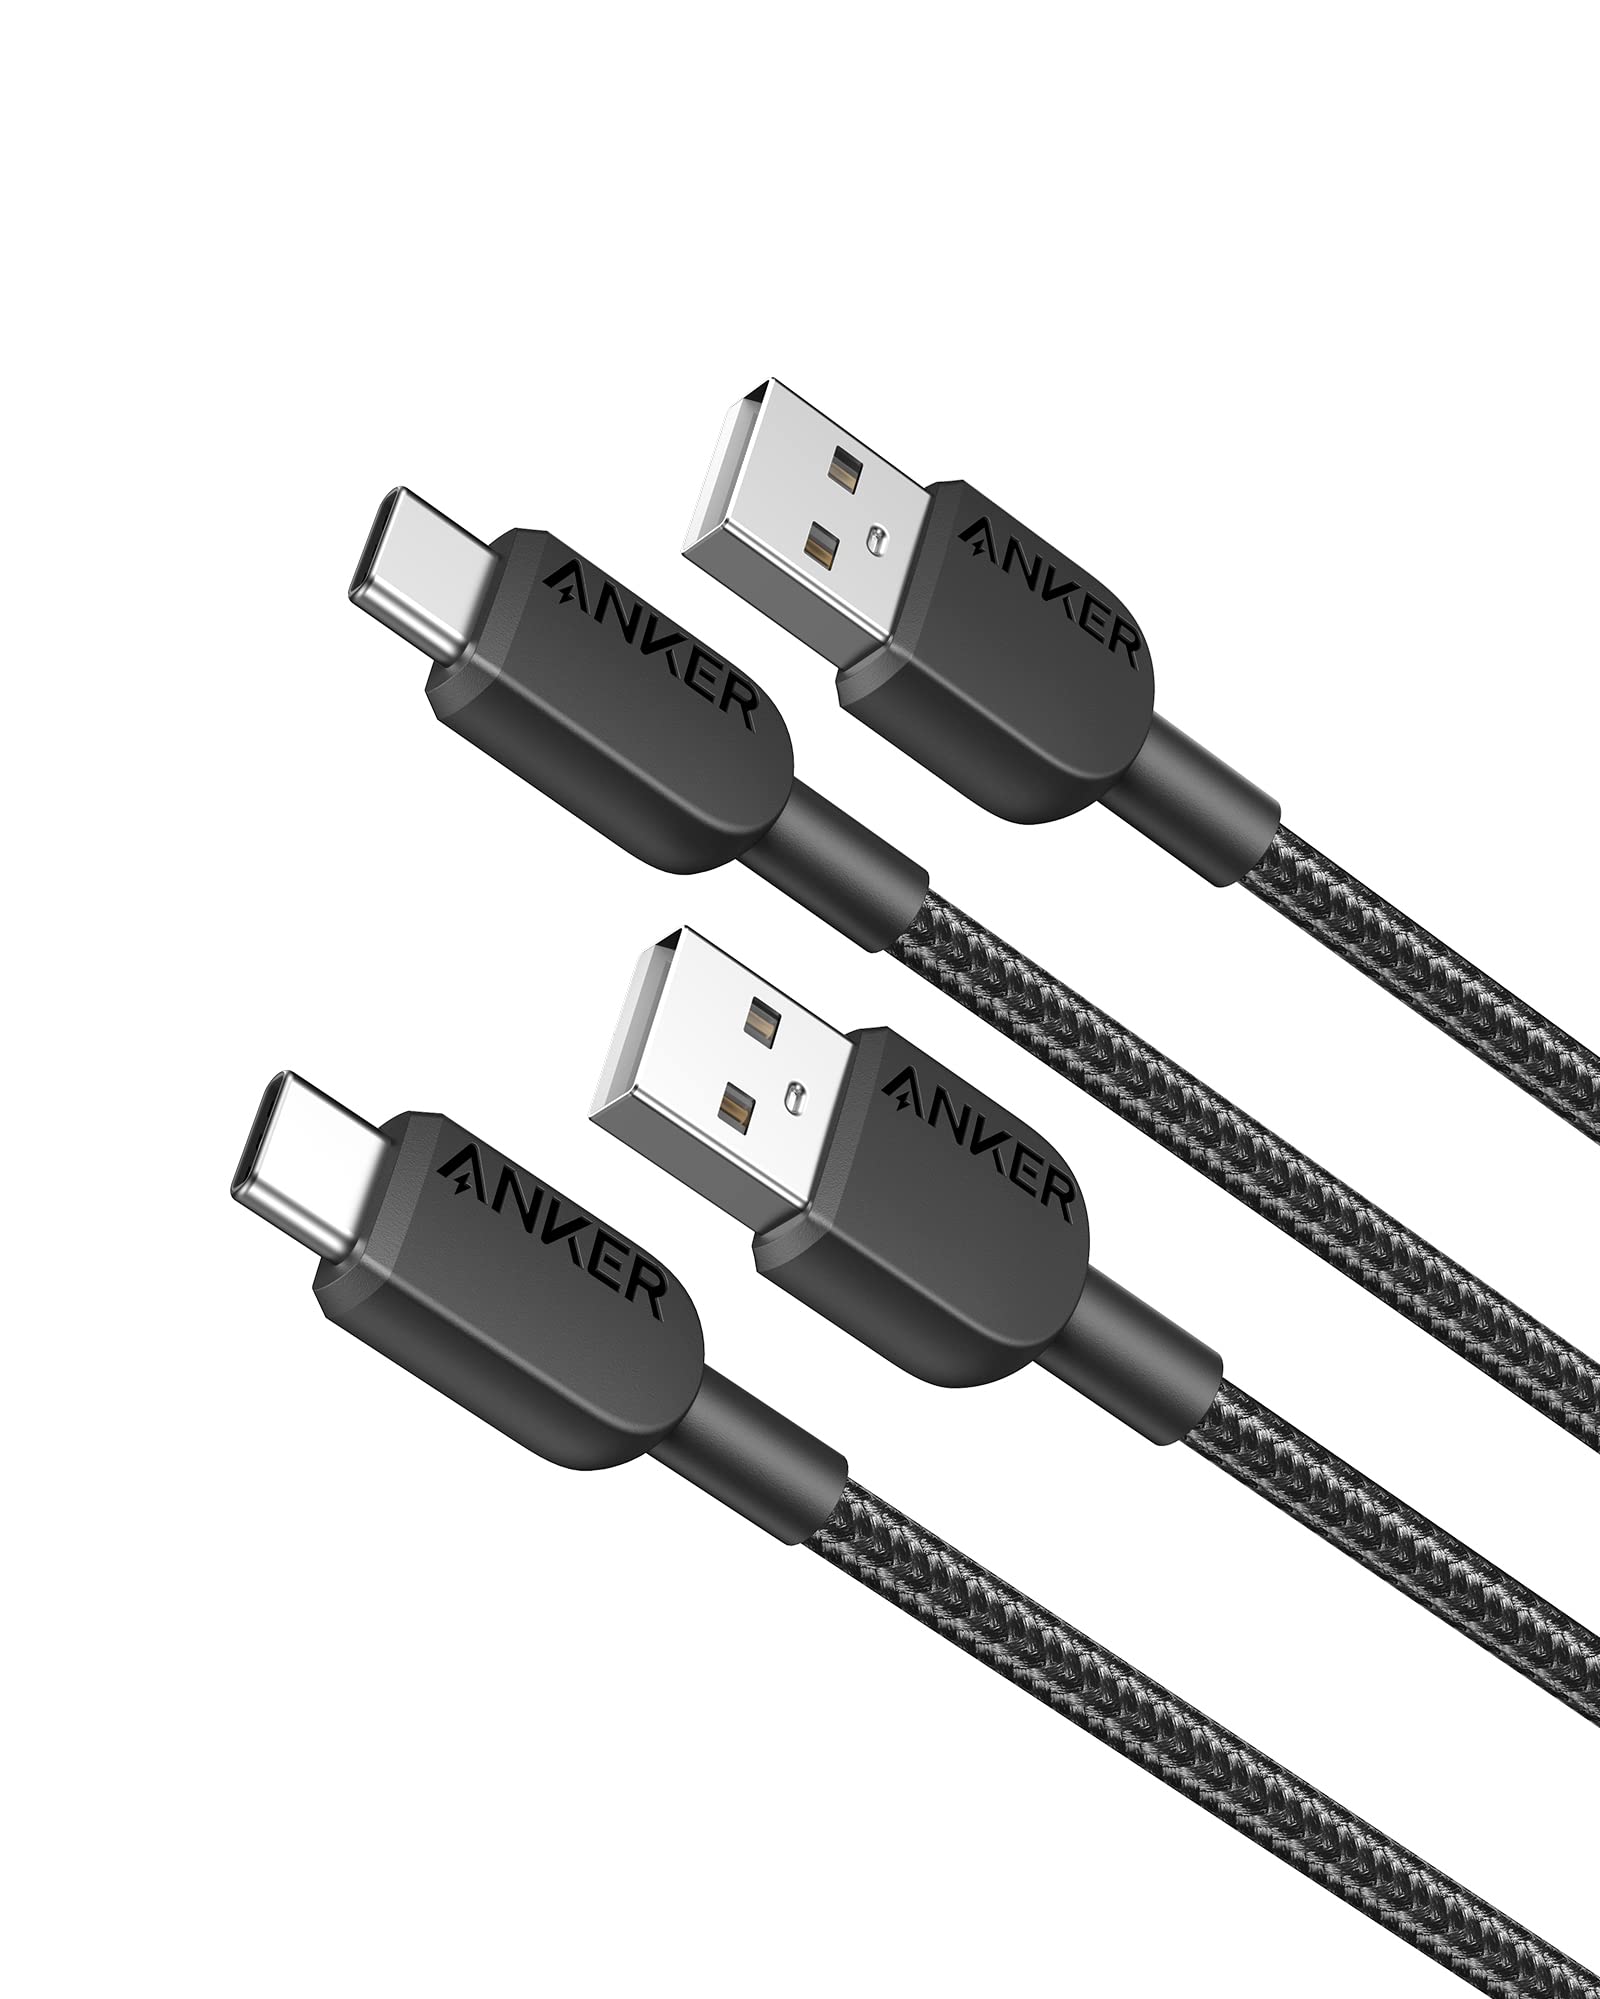 2-Pack Anker 310 USB-A to USB-C Braided Charging Cable (Black): 3' $6 ($3 each), 6' $7 ($3.50 each), 10' $10 ($5 each) + Free Shipping w/ Prime or on $35+